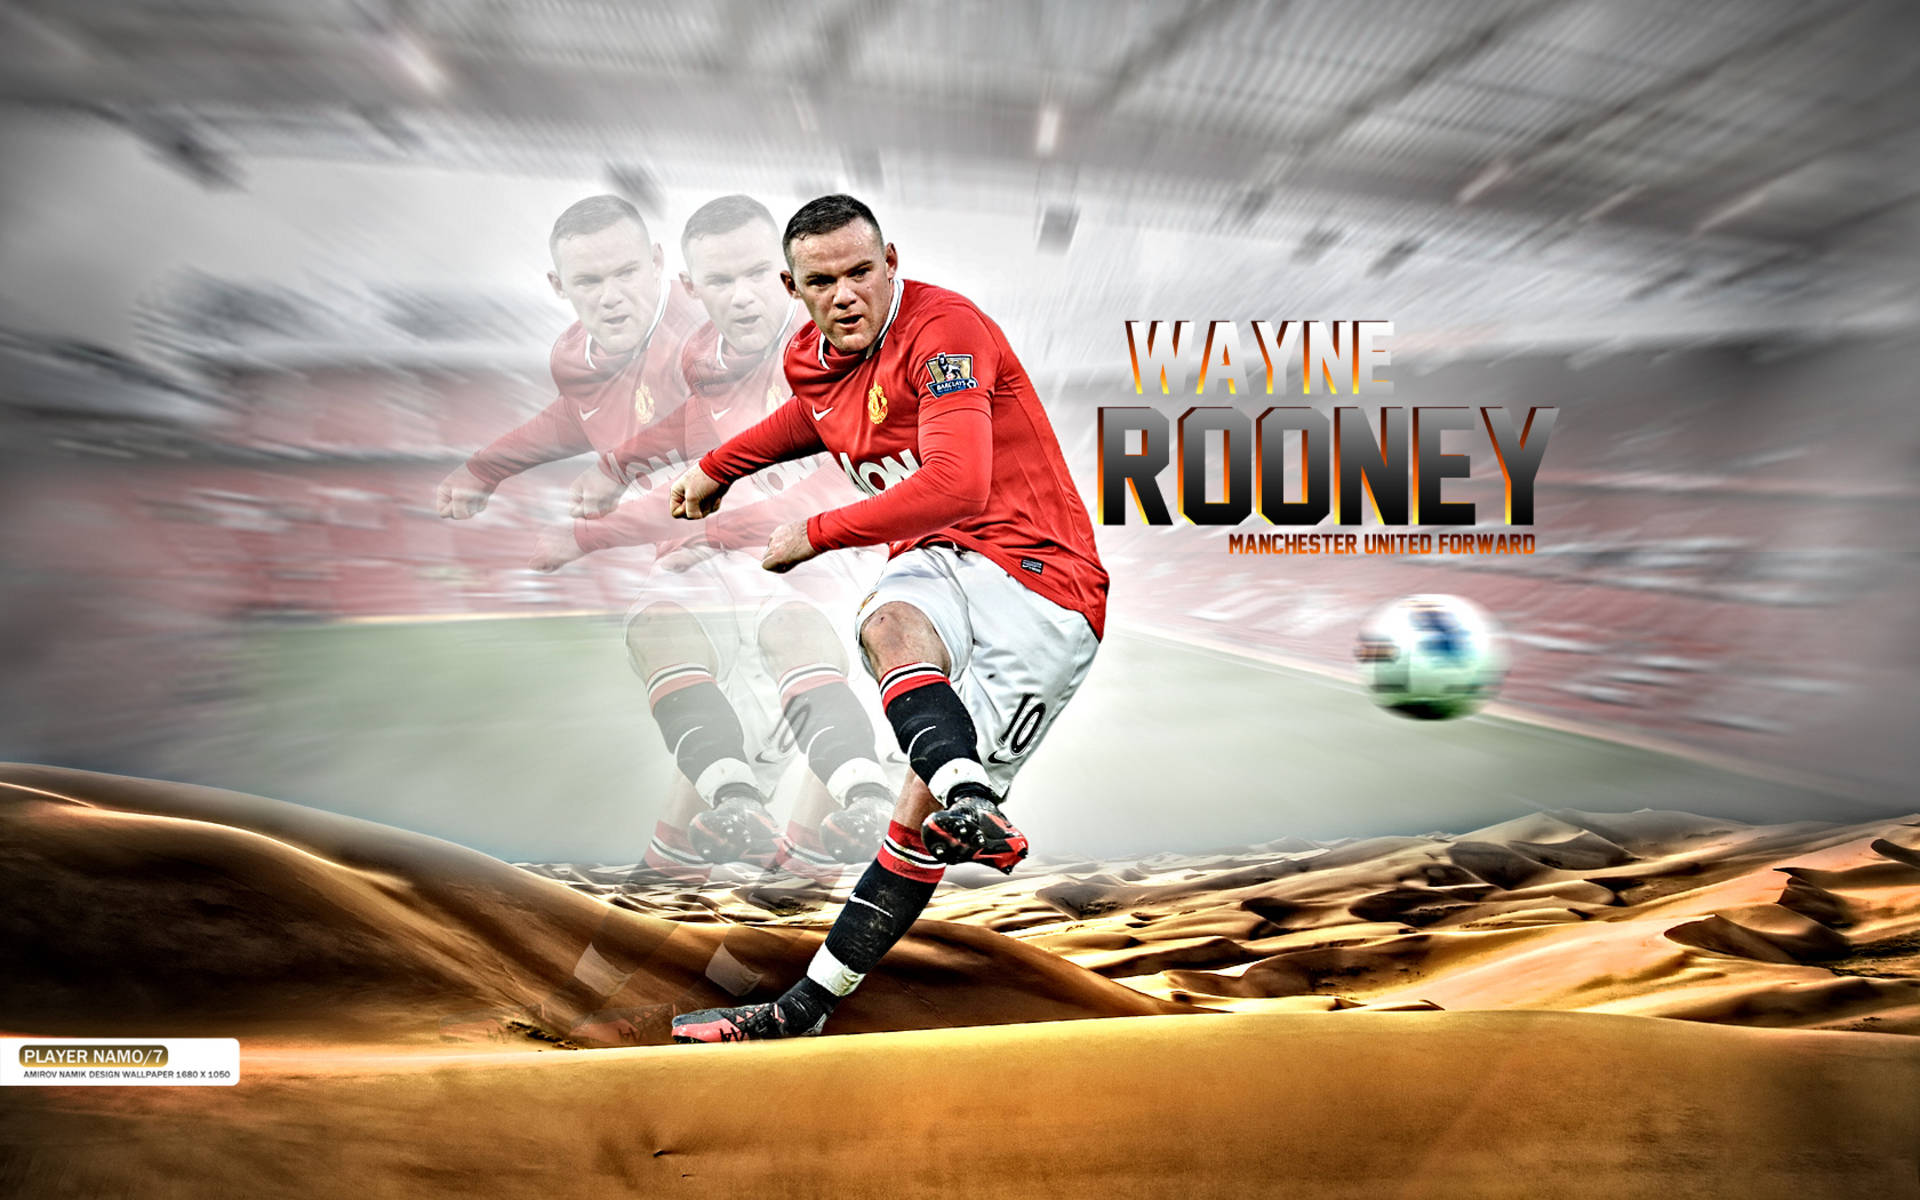 Wayne Rooney Manchester United Forward Picture